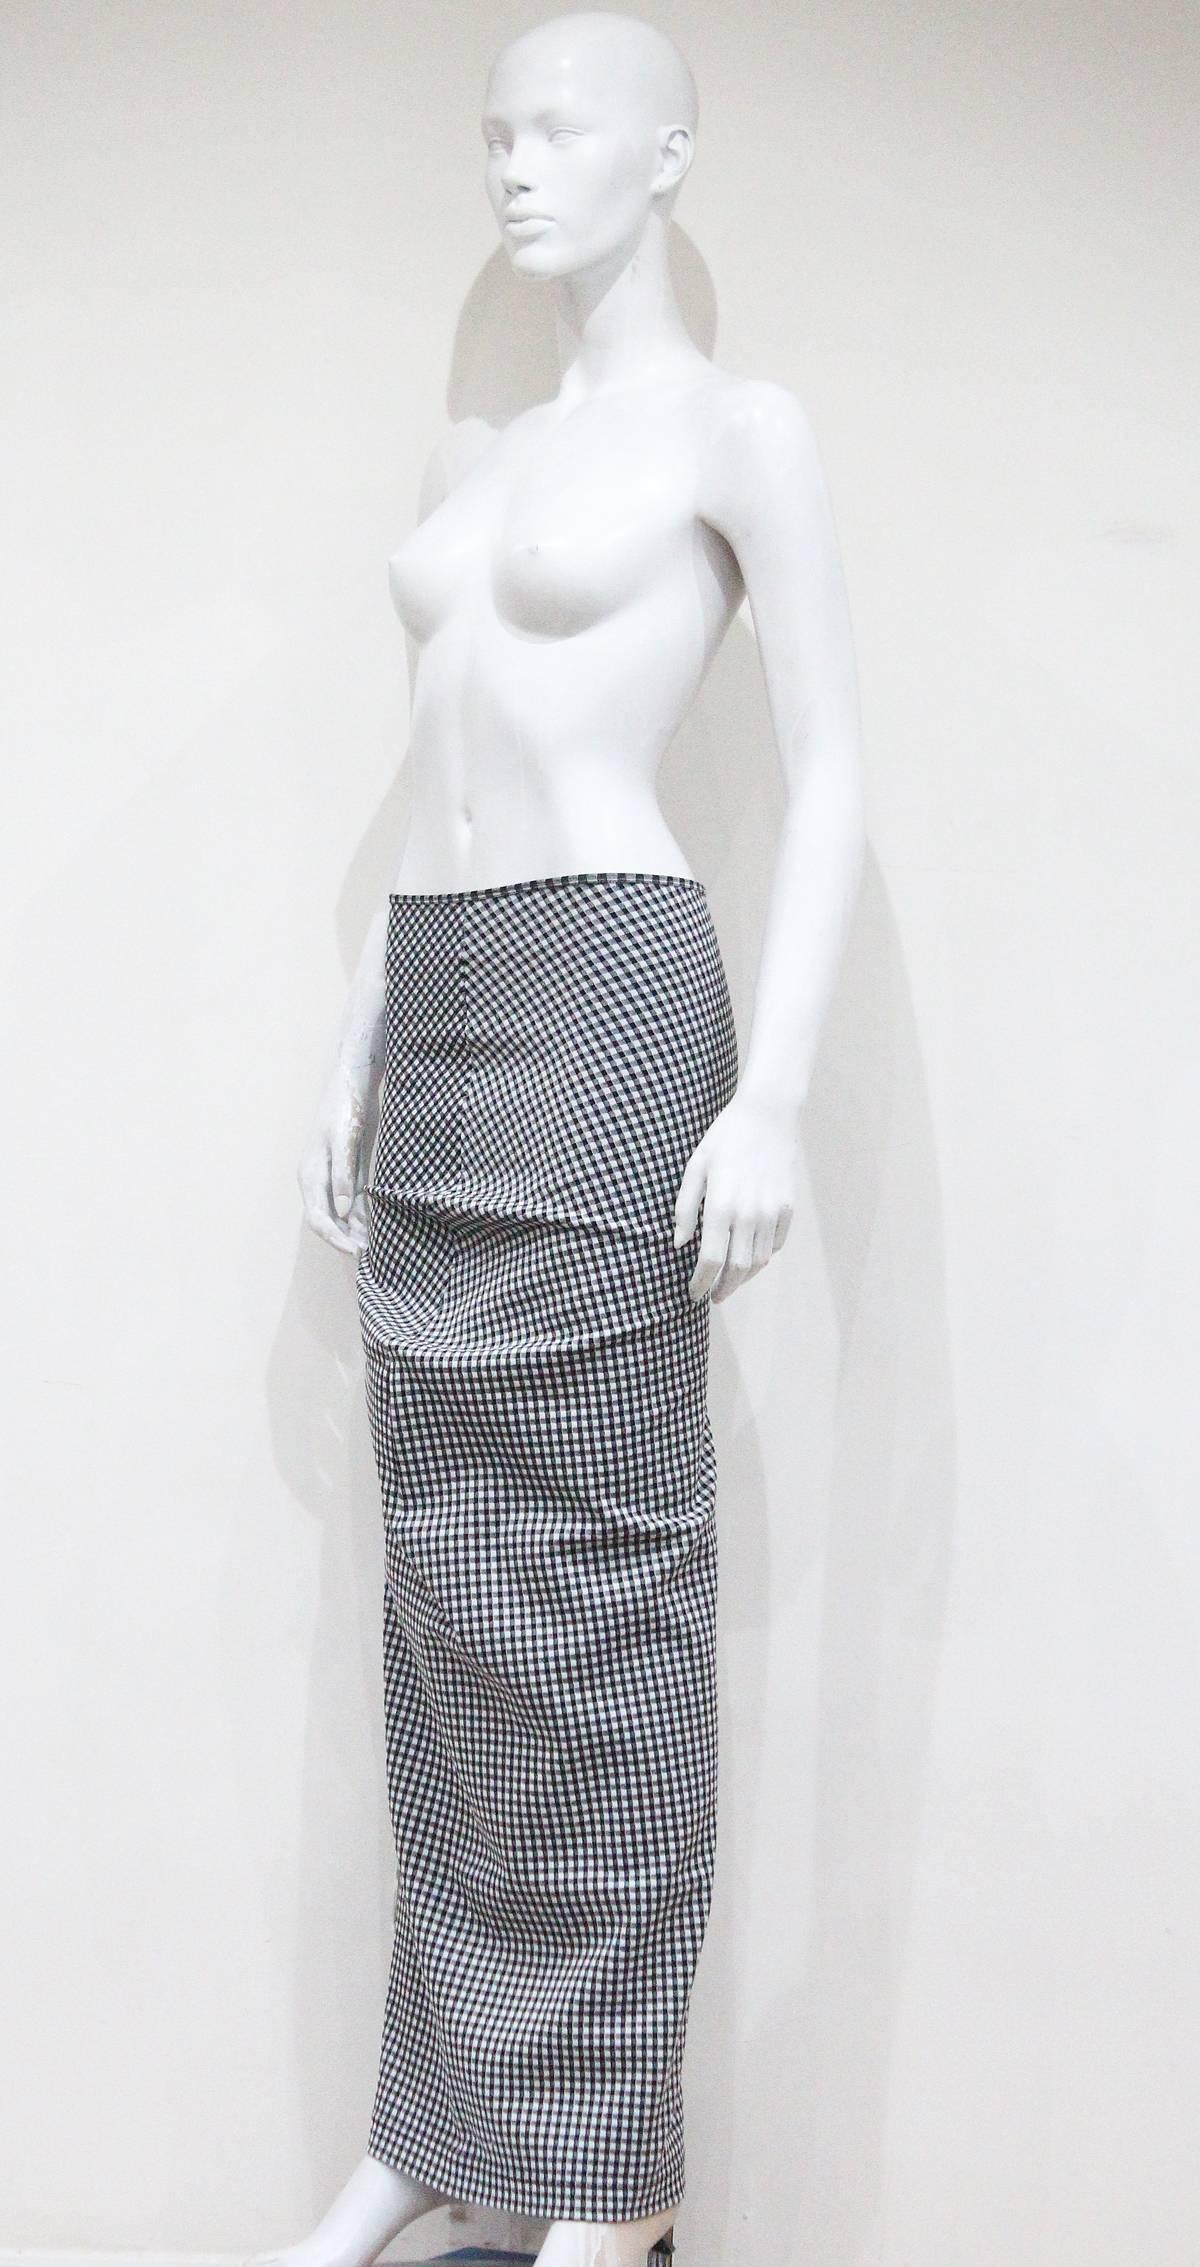 Gray Comme des Garcons 'Body Meets Dress' / 'Bump' collection gingham skirt, c. 1997